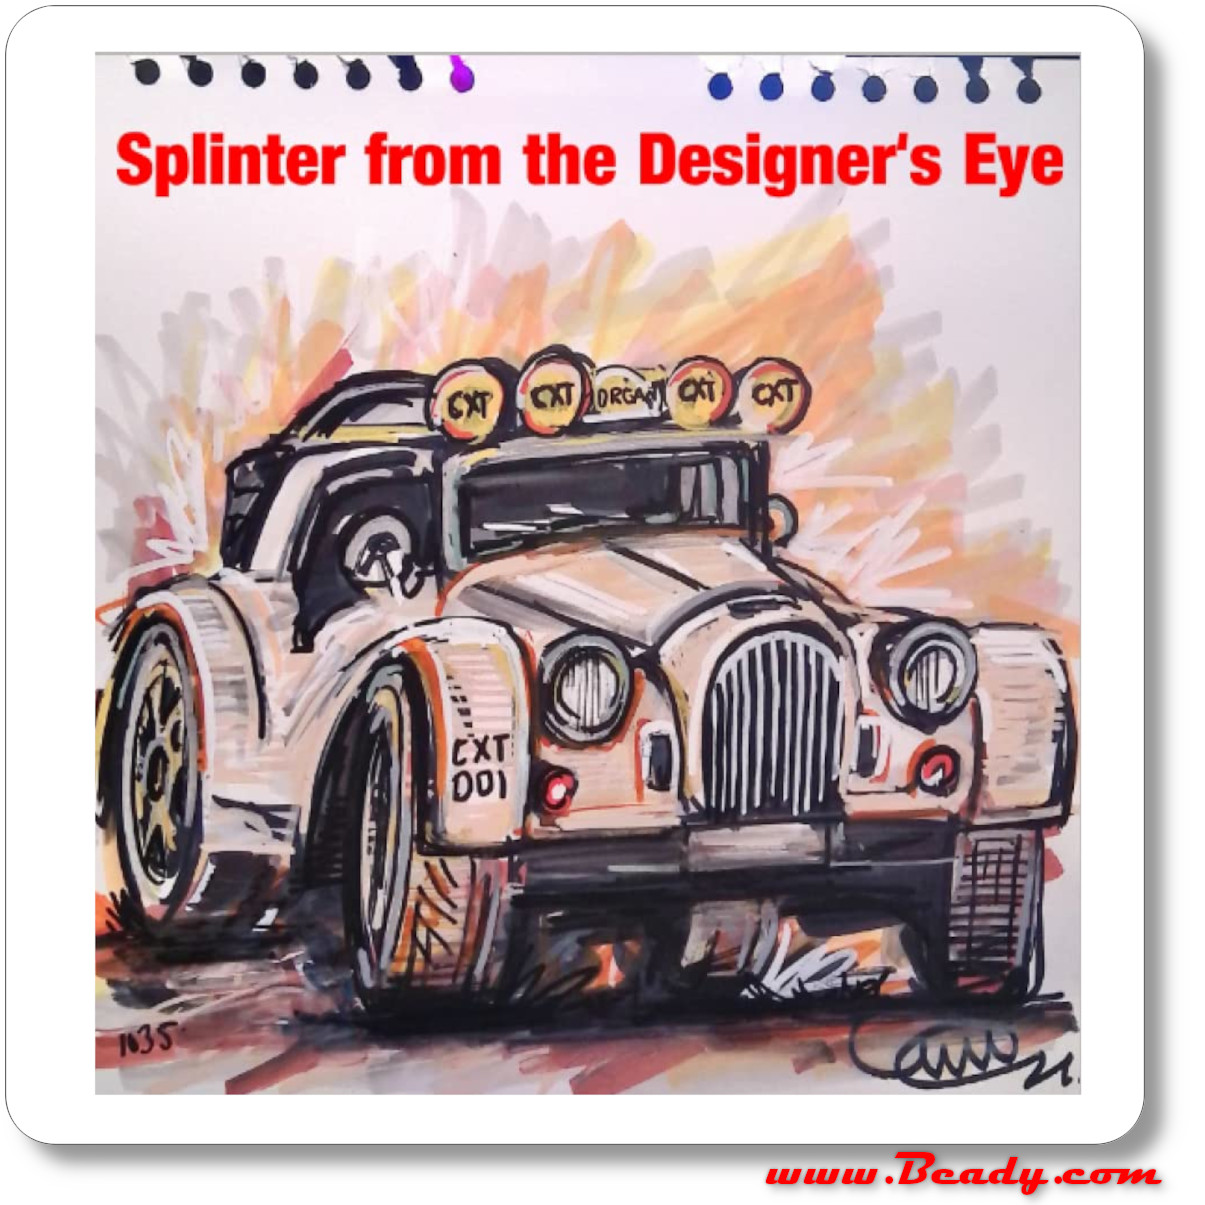 Splinter from the designers eye. The book